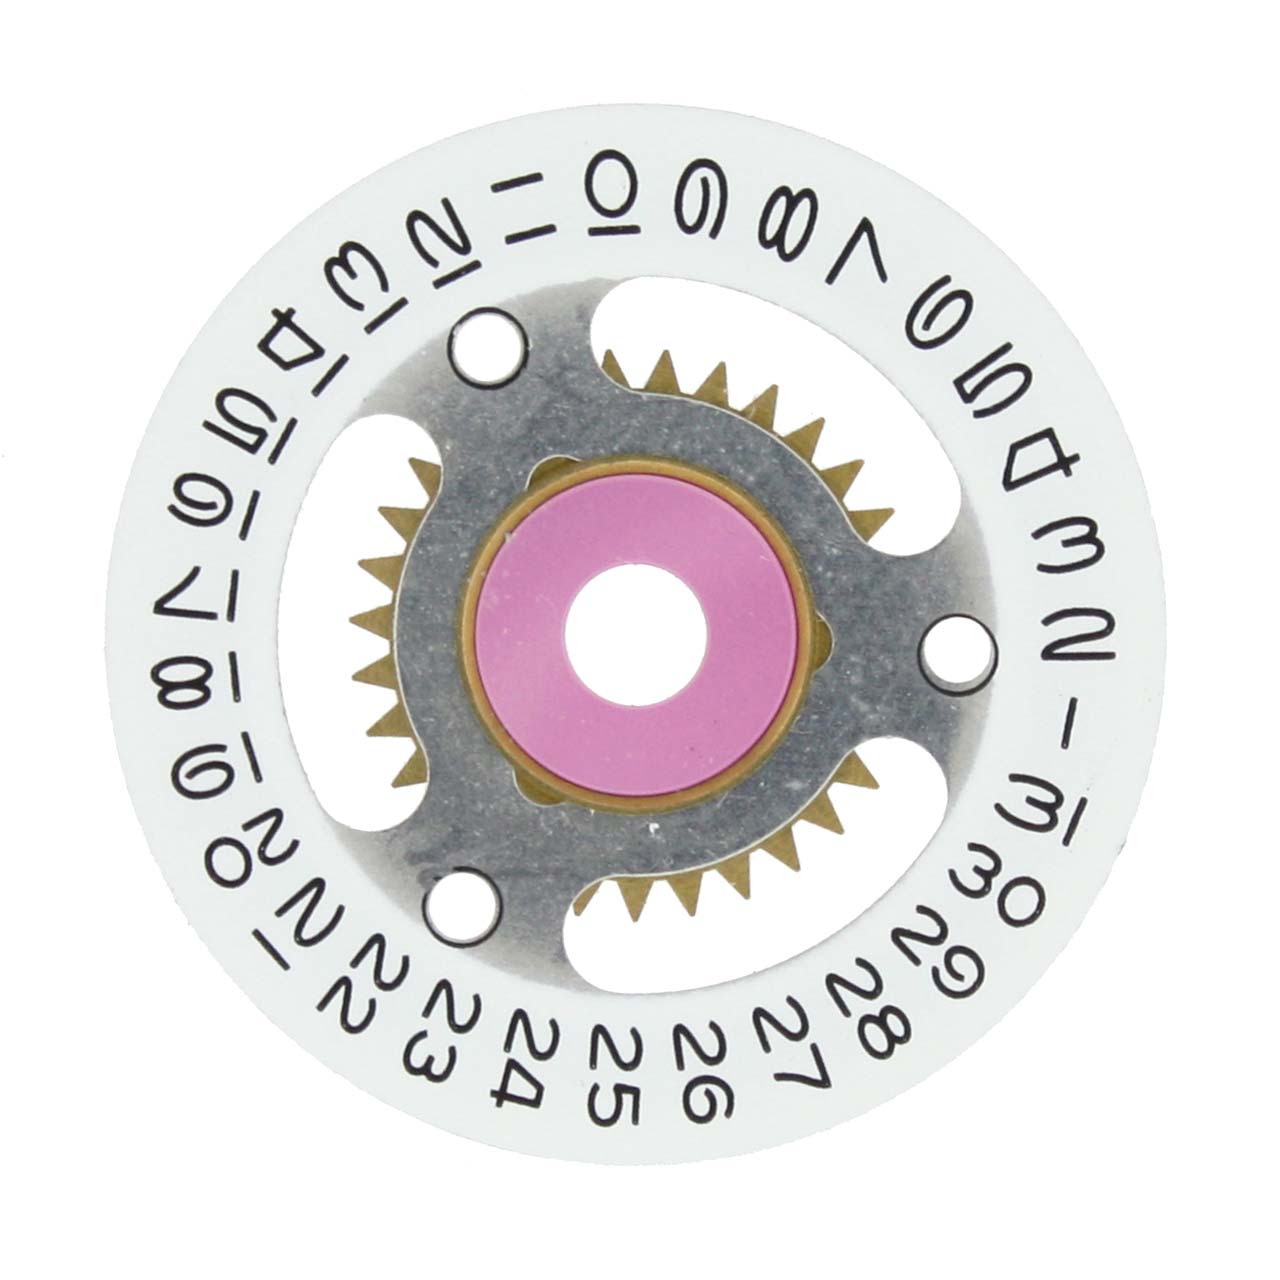 Replacement Date Dial Discs for Rolex Calibers (Various Styles)